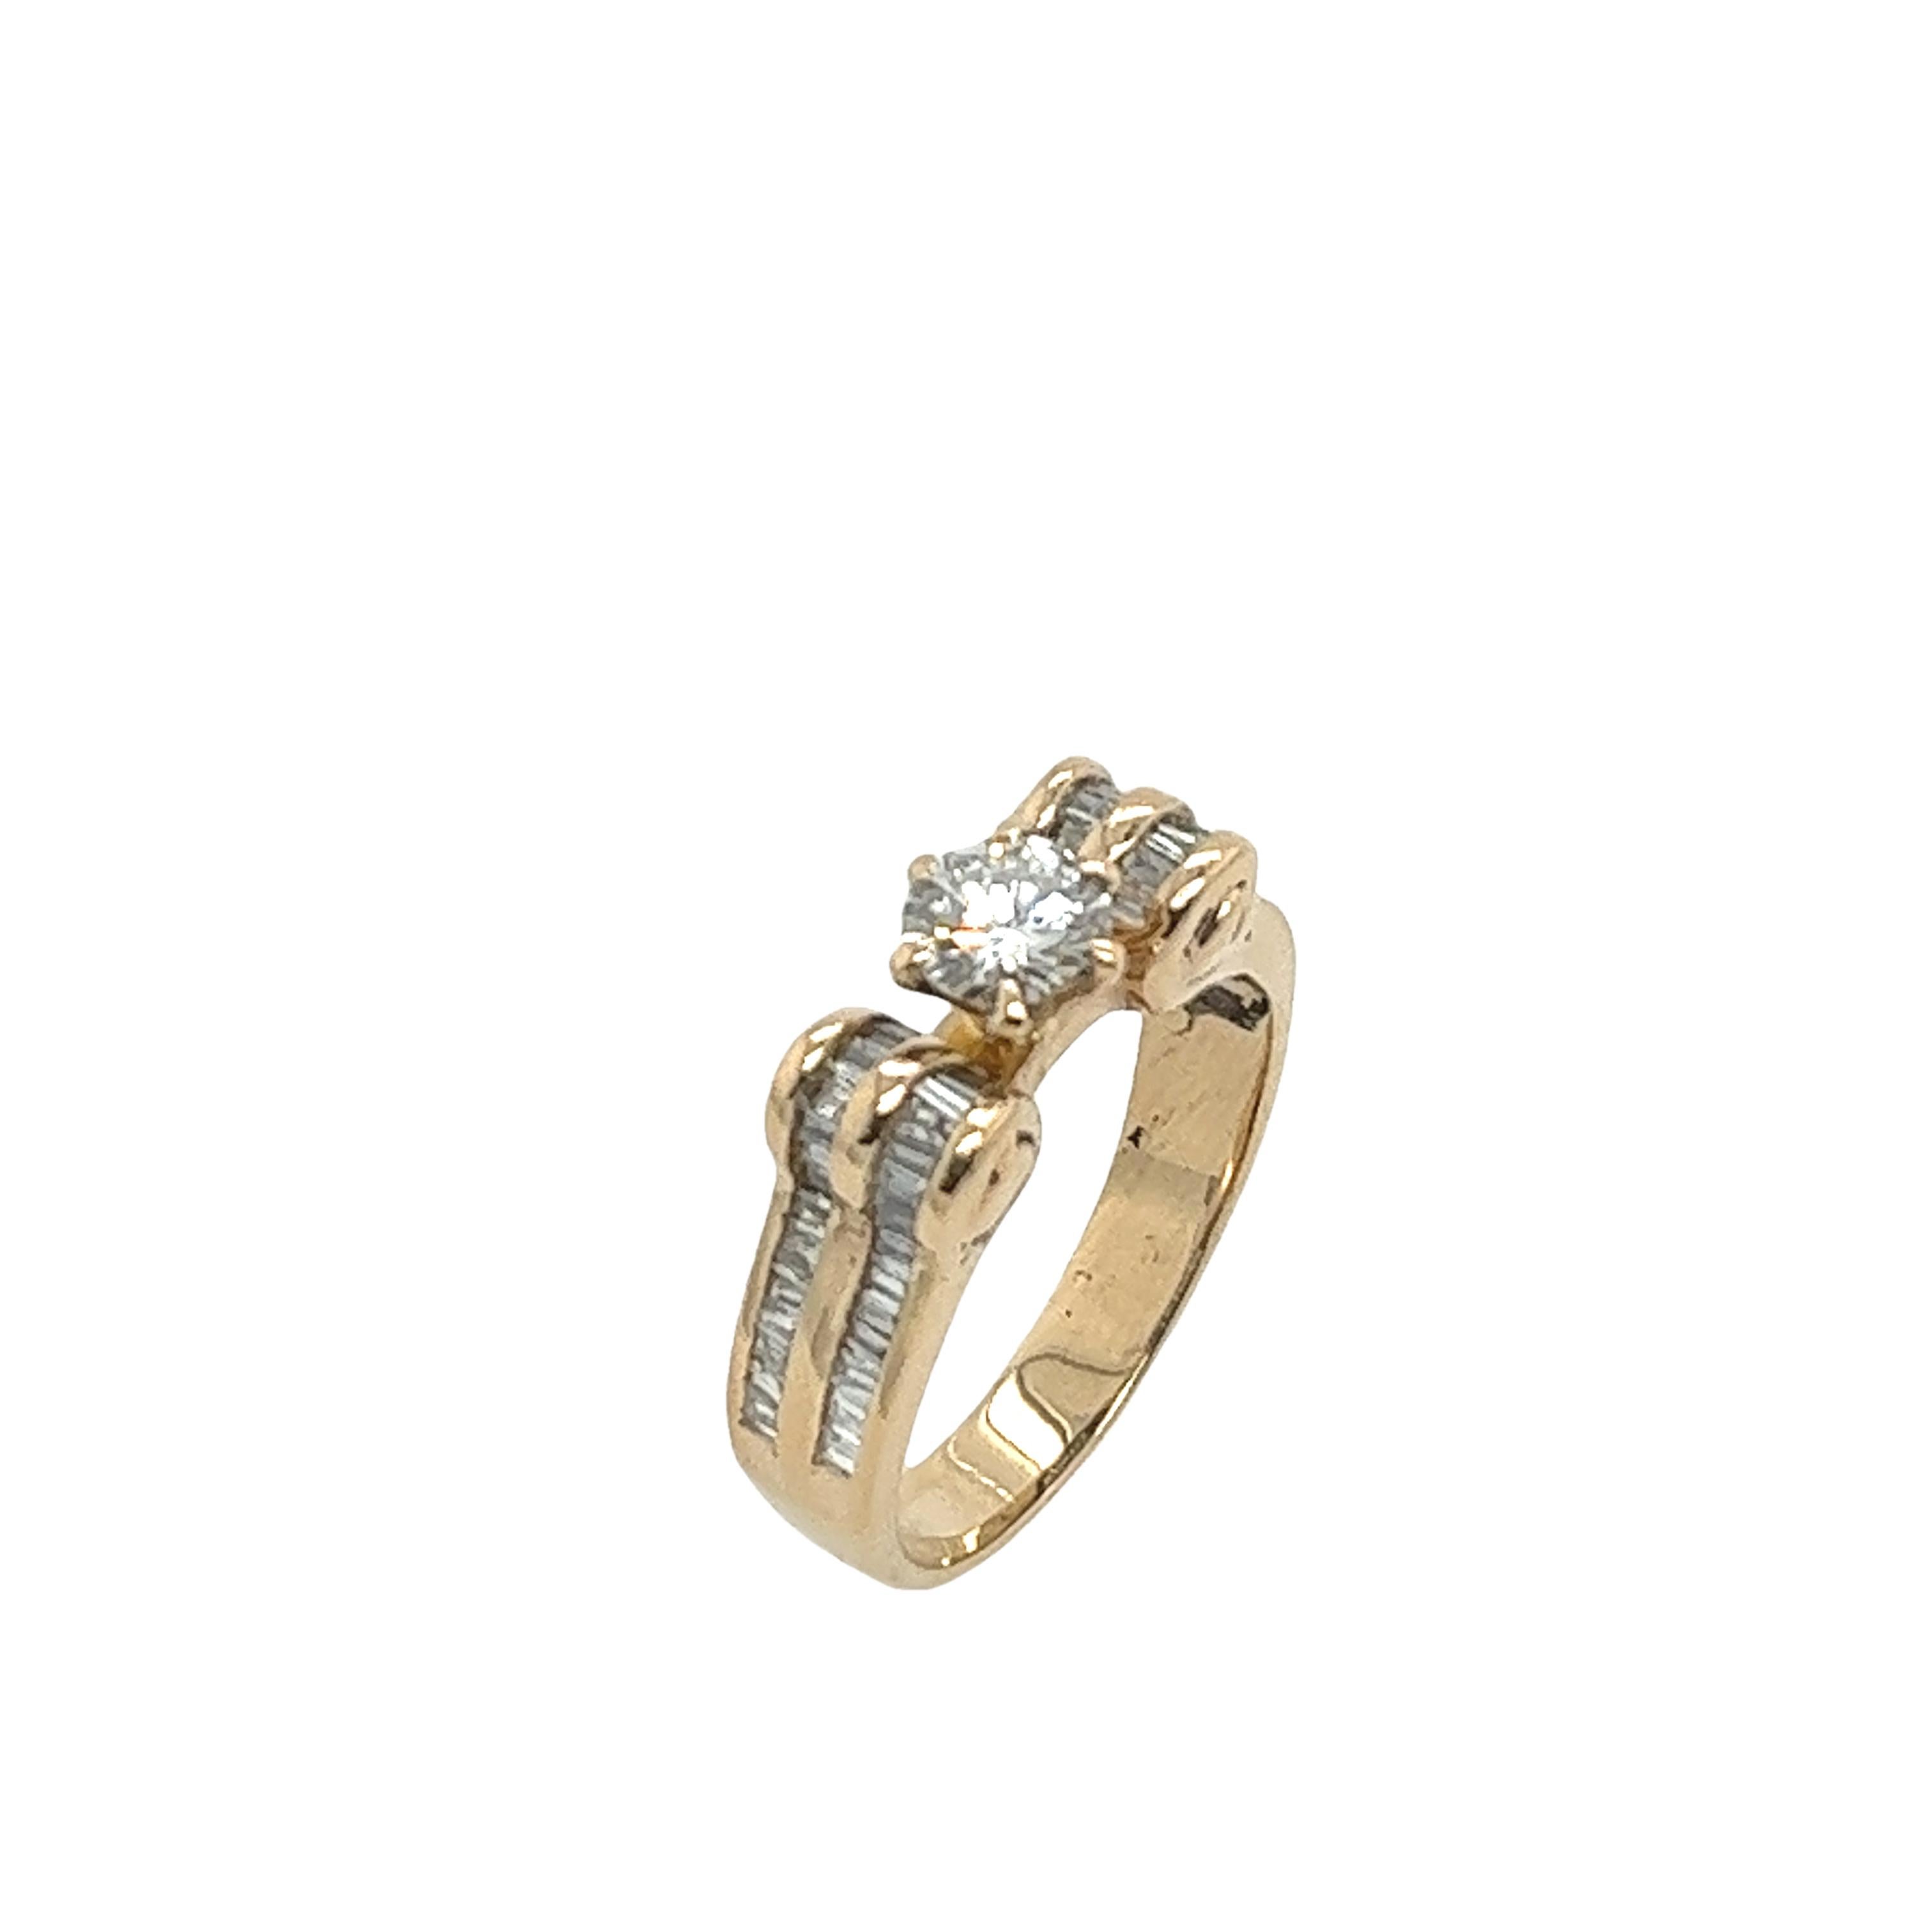 Women's 18ct Yellow Gold Diamond Solitaire Ring Set With 0.58ct Round Diamond & 0.43ct For Sale